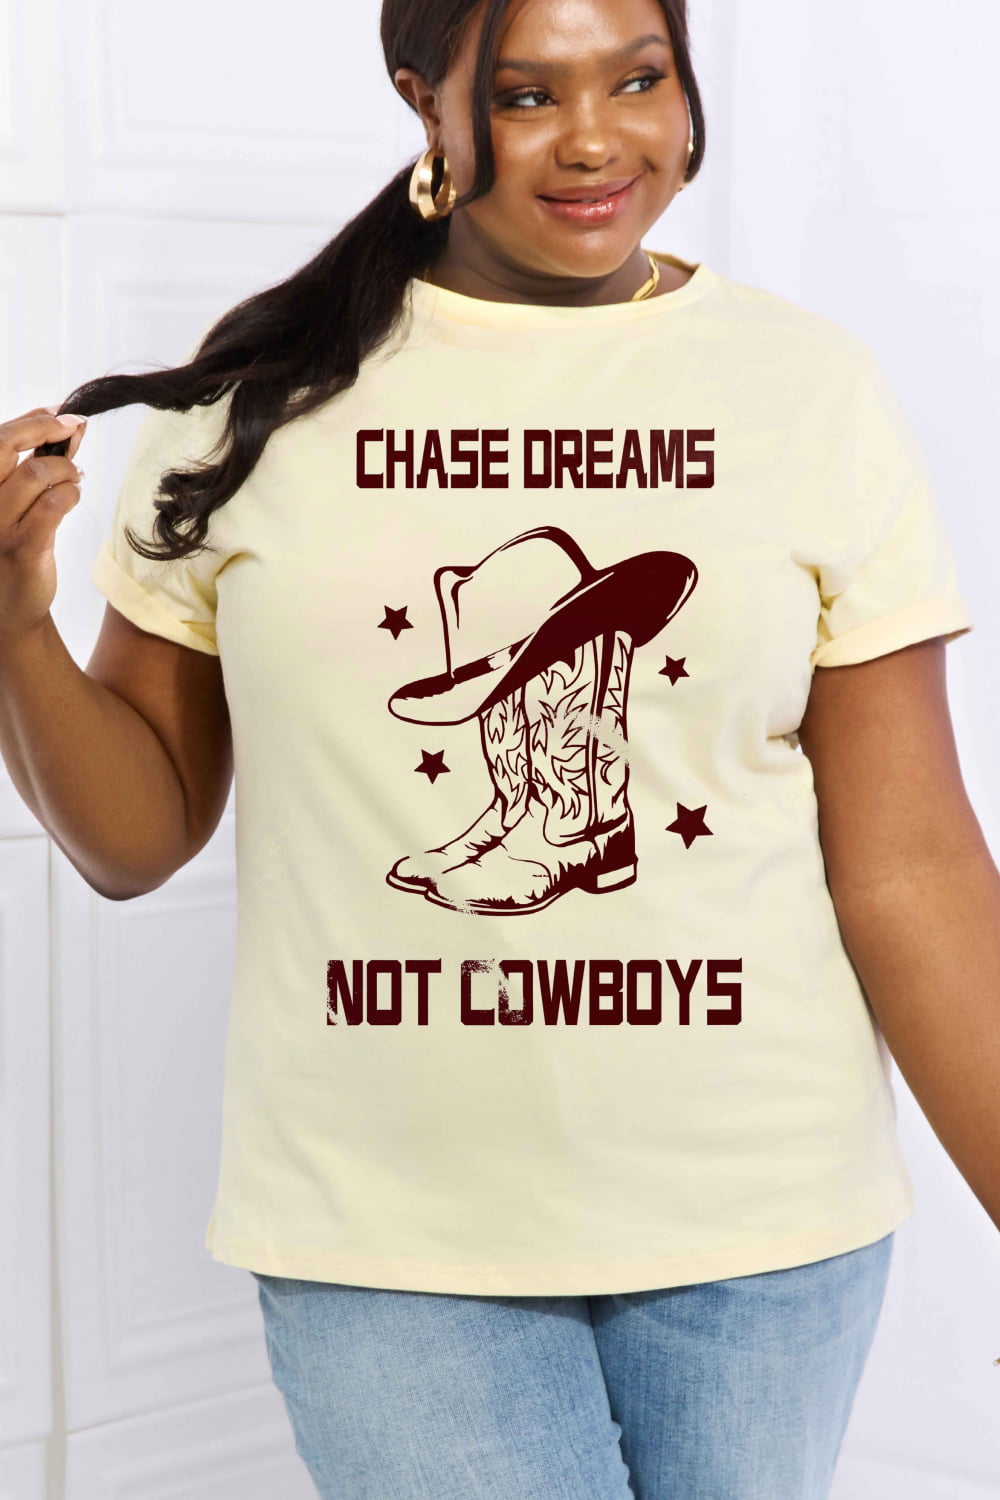 CHASE DREAMS NOT COWBOYS Graphic Cotton Tee